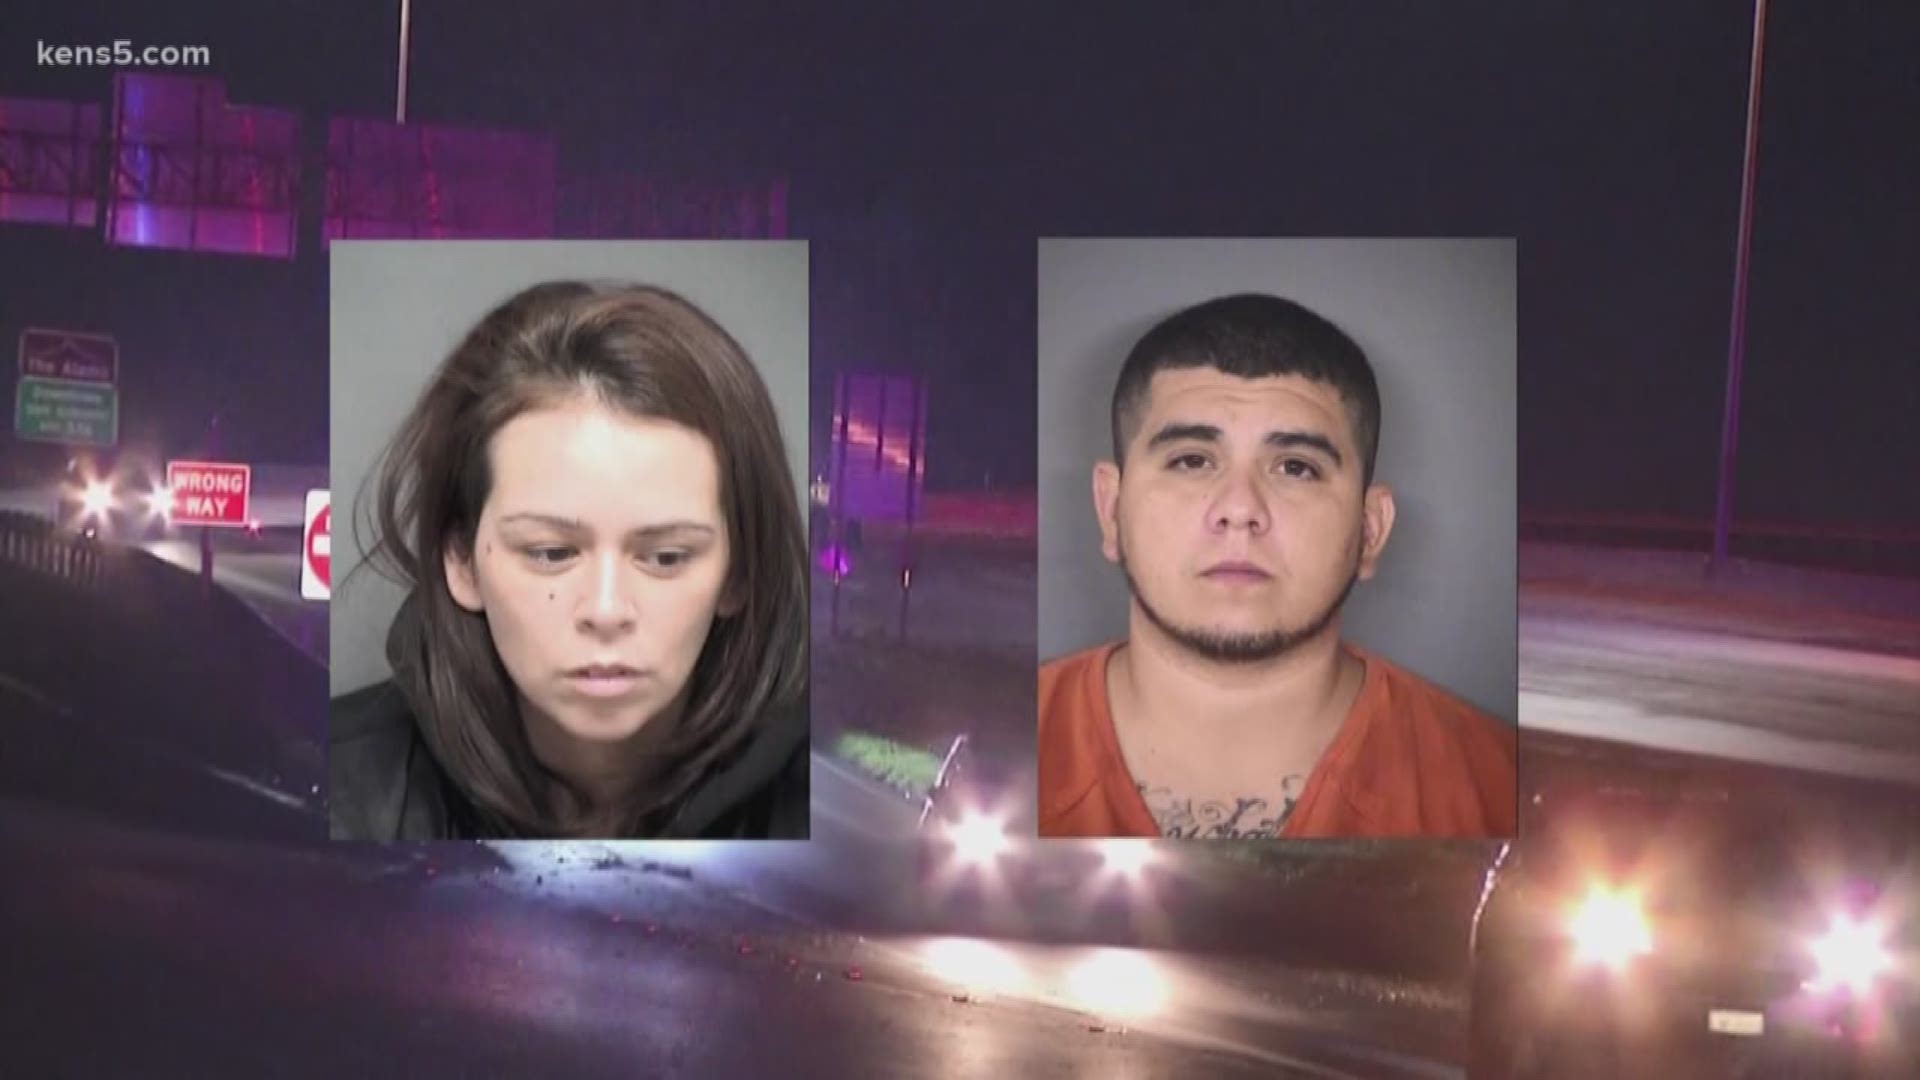 They're accused of fleeing with stolen mail. 
That chase ended early this morning with a crash on interstate 35 near the Pine Street exit. Eyewitness news reporter Jaleesa Irizarry joins us live now from the Bexar County Jail with the latest.